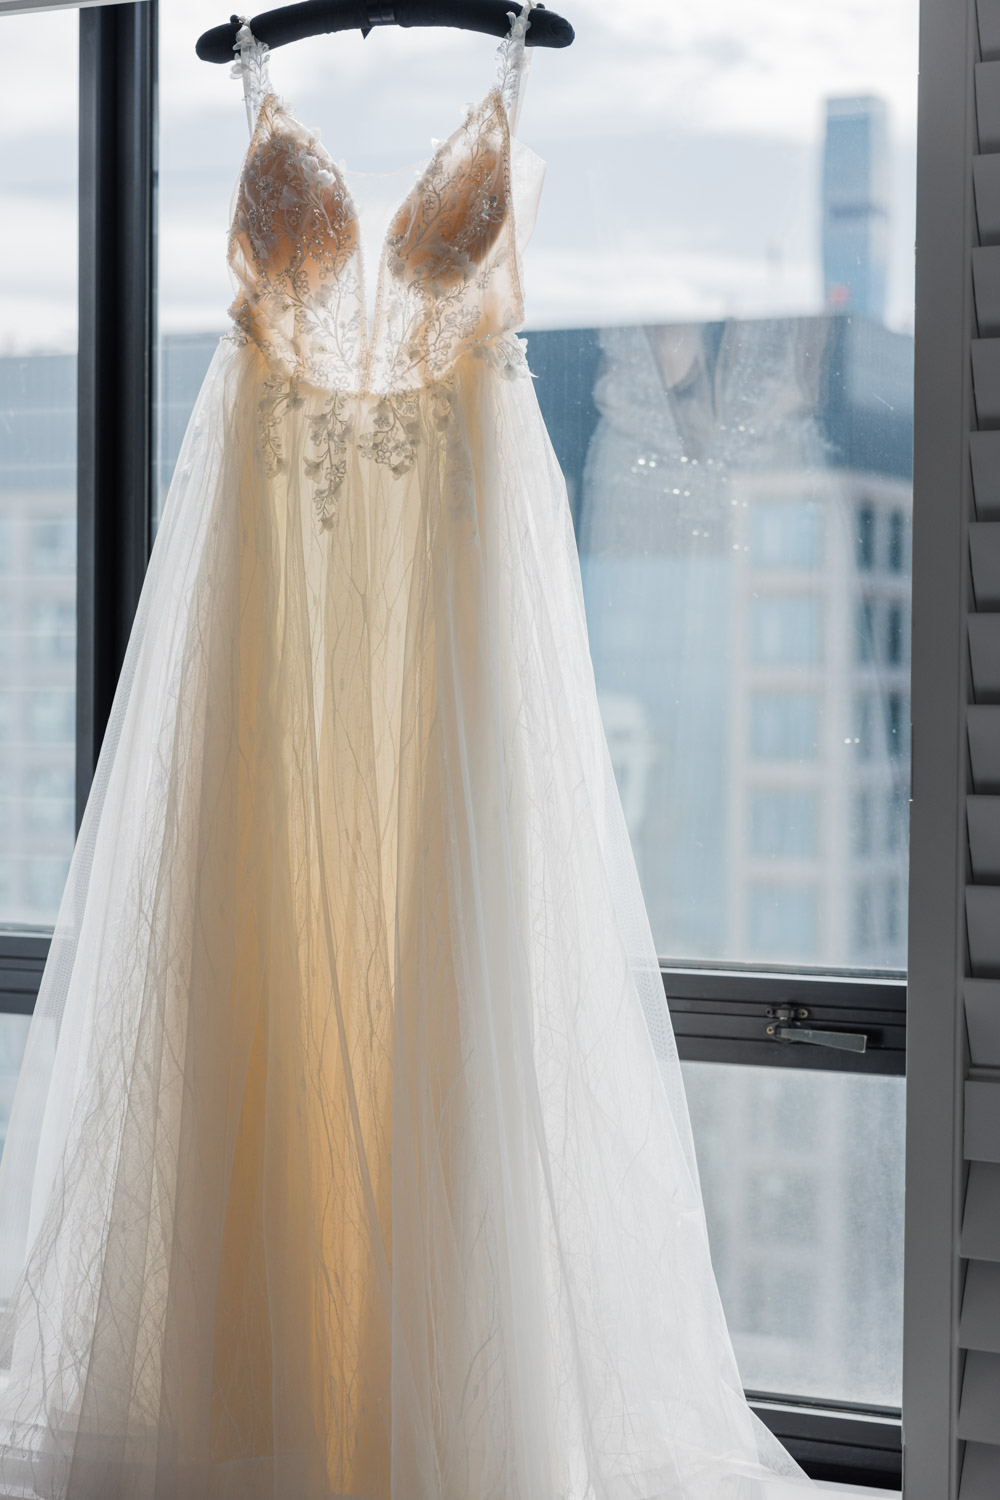 A wedding dress hanging in the window of the Ritz Carlton hotel in downtown Chicago.